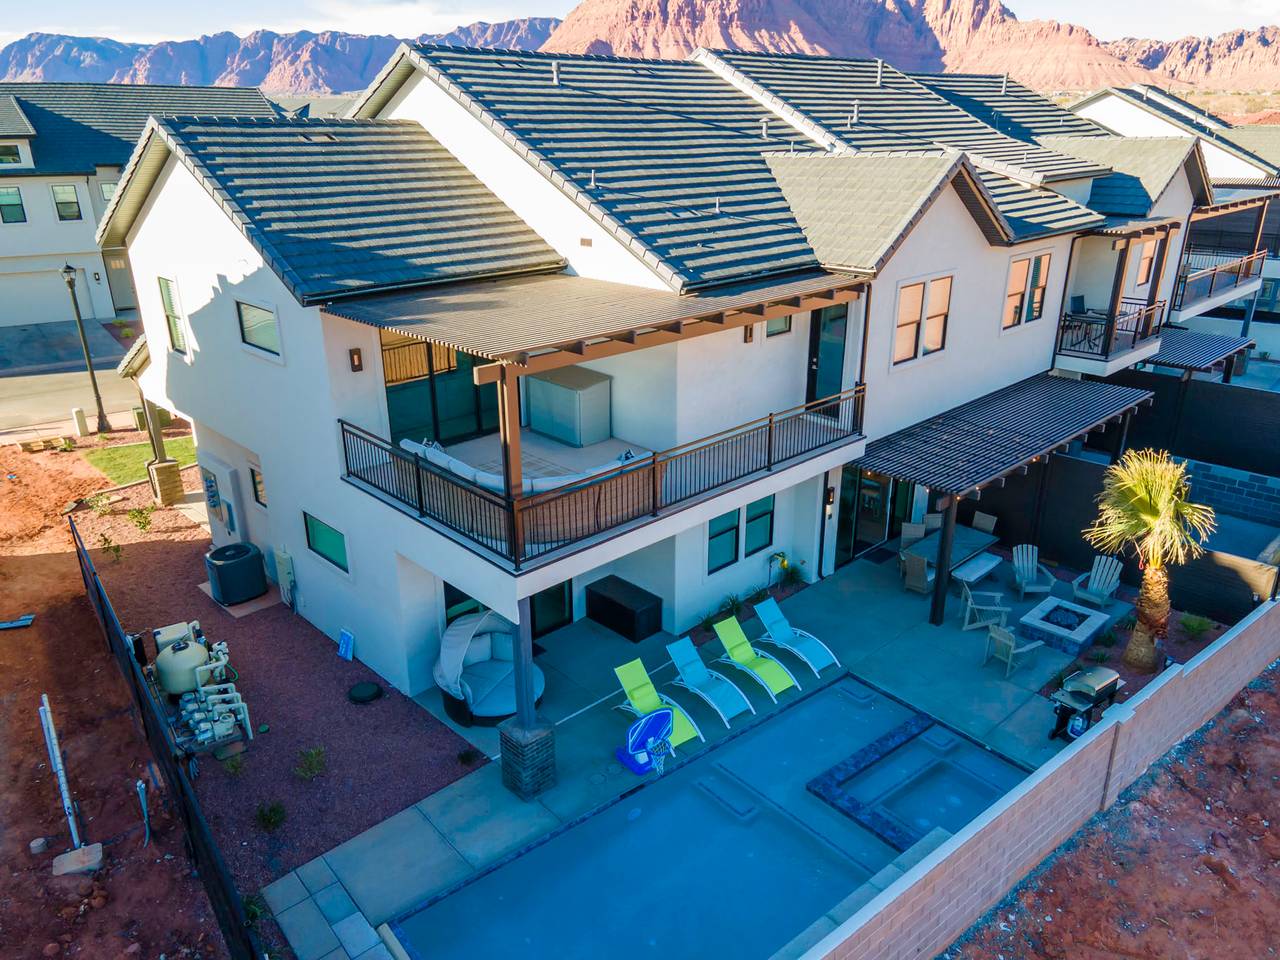 Blissful Poolhouse 62 At Ocotillo Springs Resort 5 Br Luxury St George Vacation Home With Private Pool And Hot Tub Utahs Best Vacation Rentals